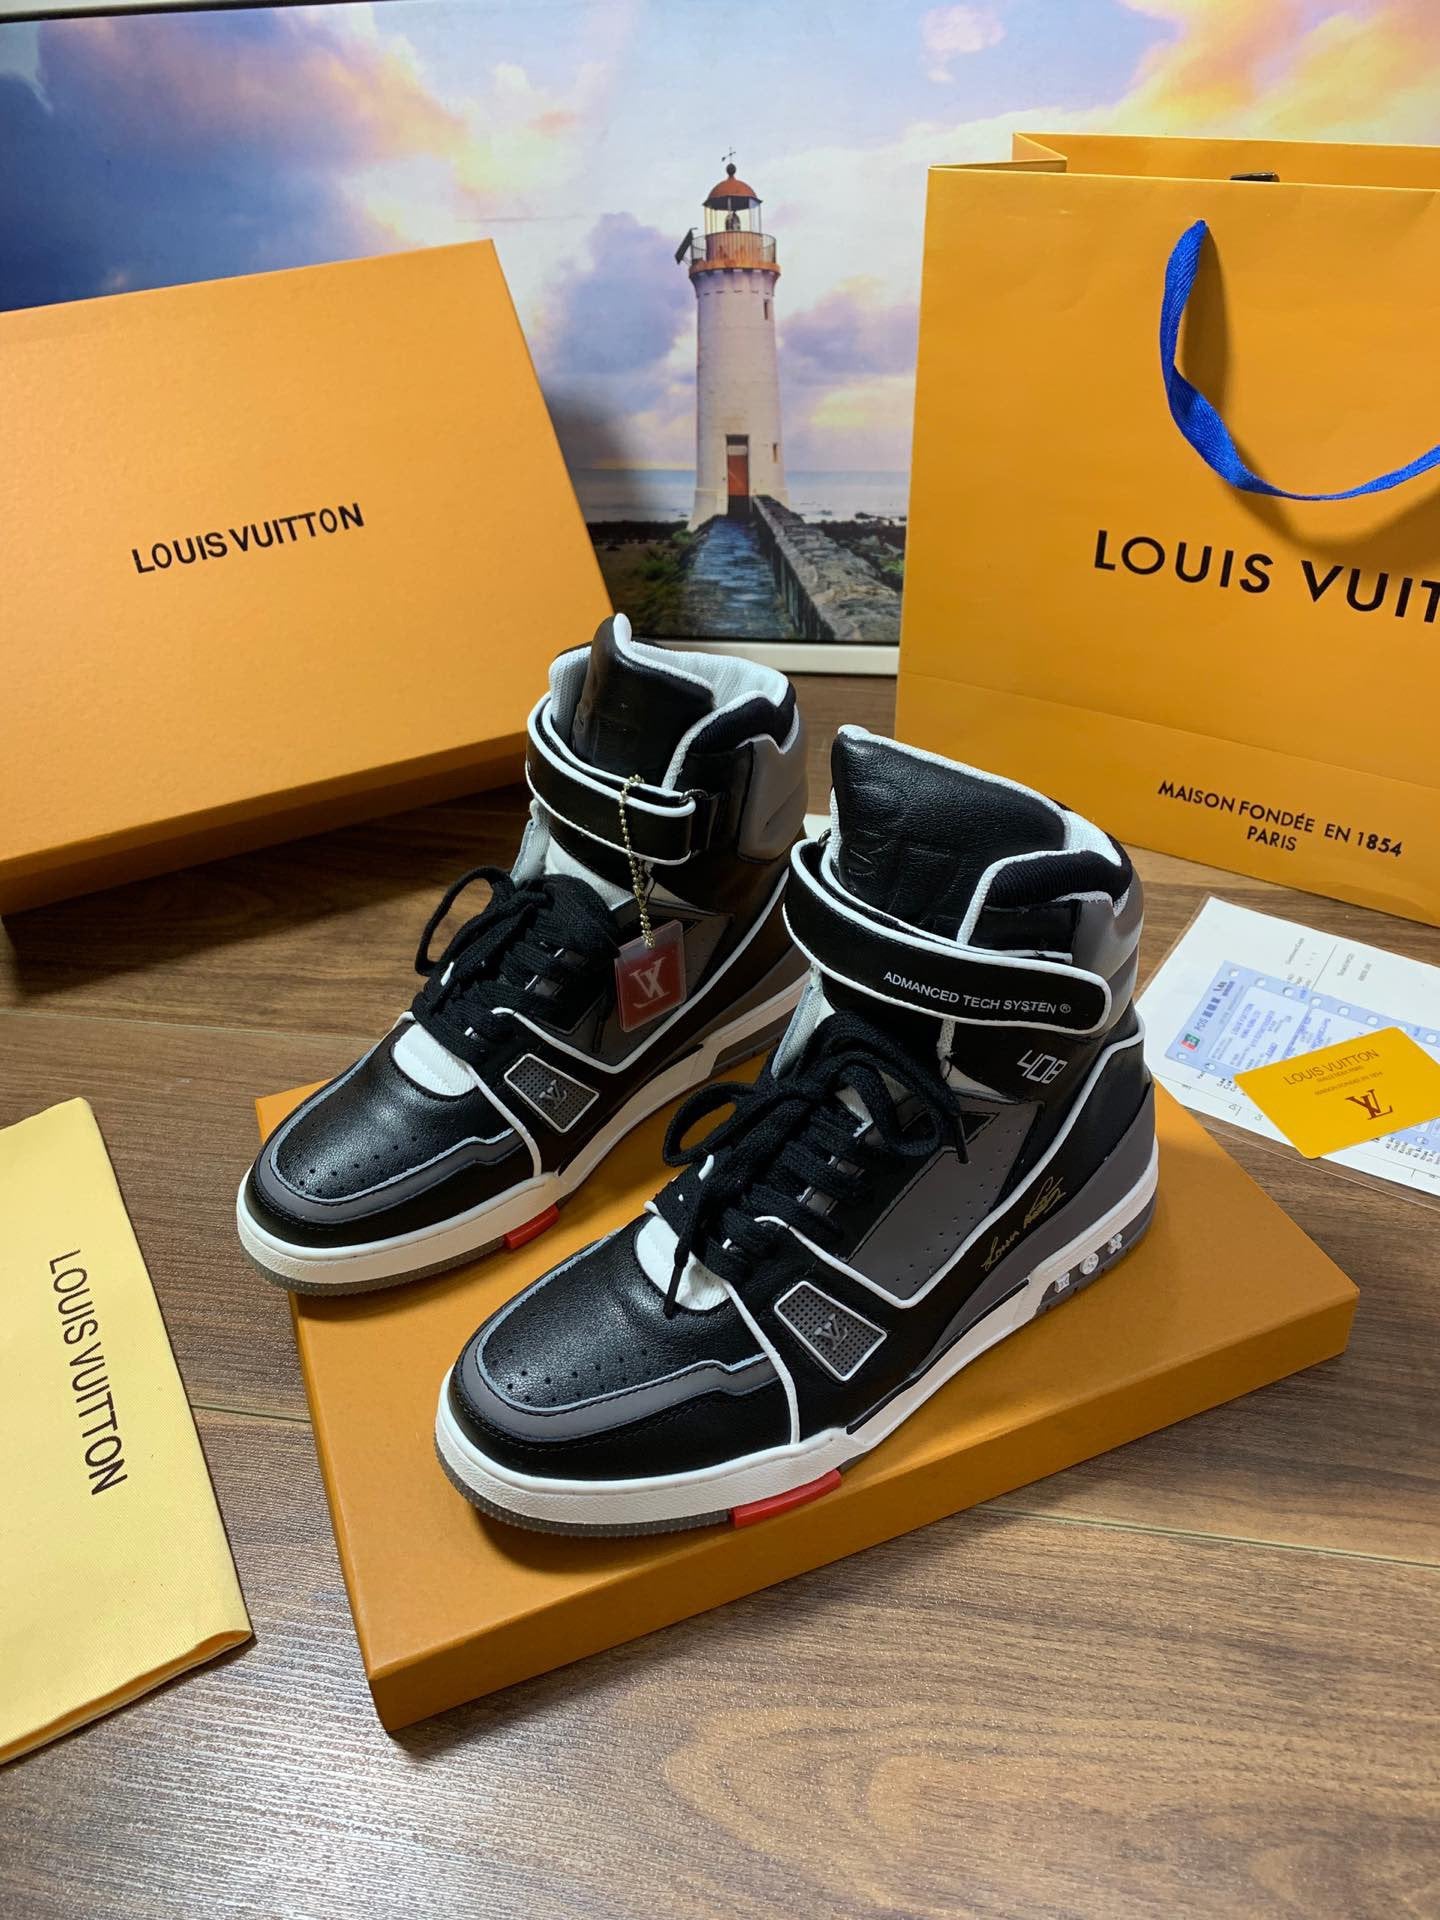 LV Louis Vuitton Men's Leather Trainer High Top Sneakers Shoes